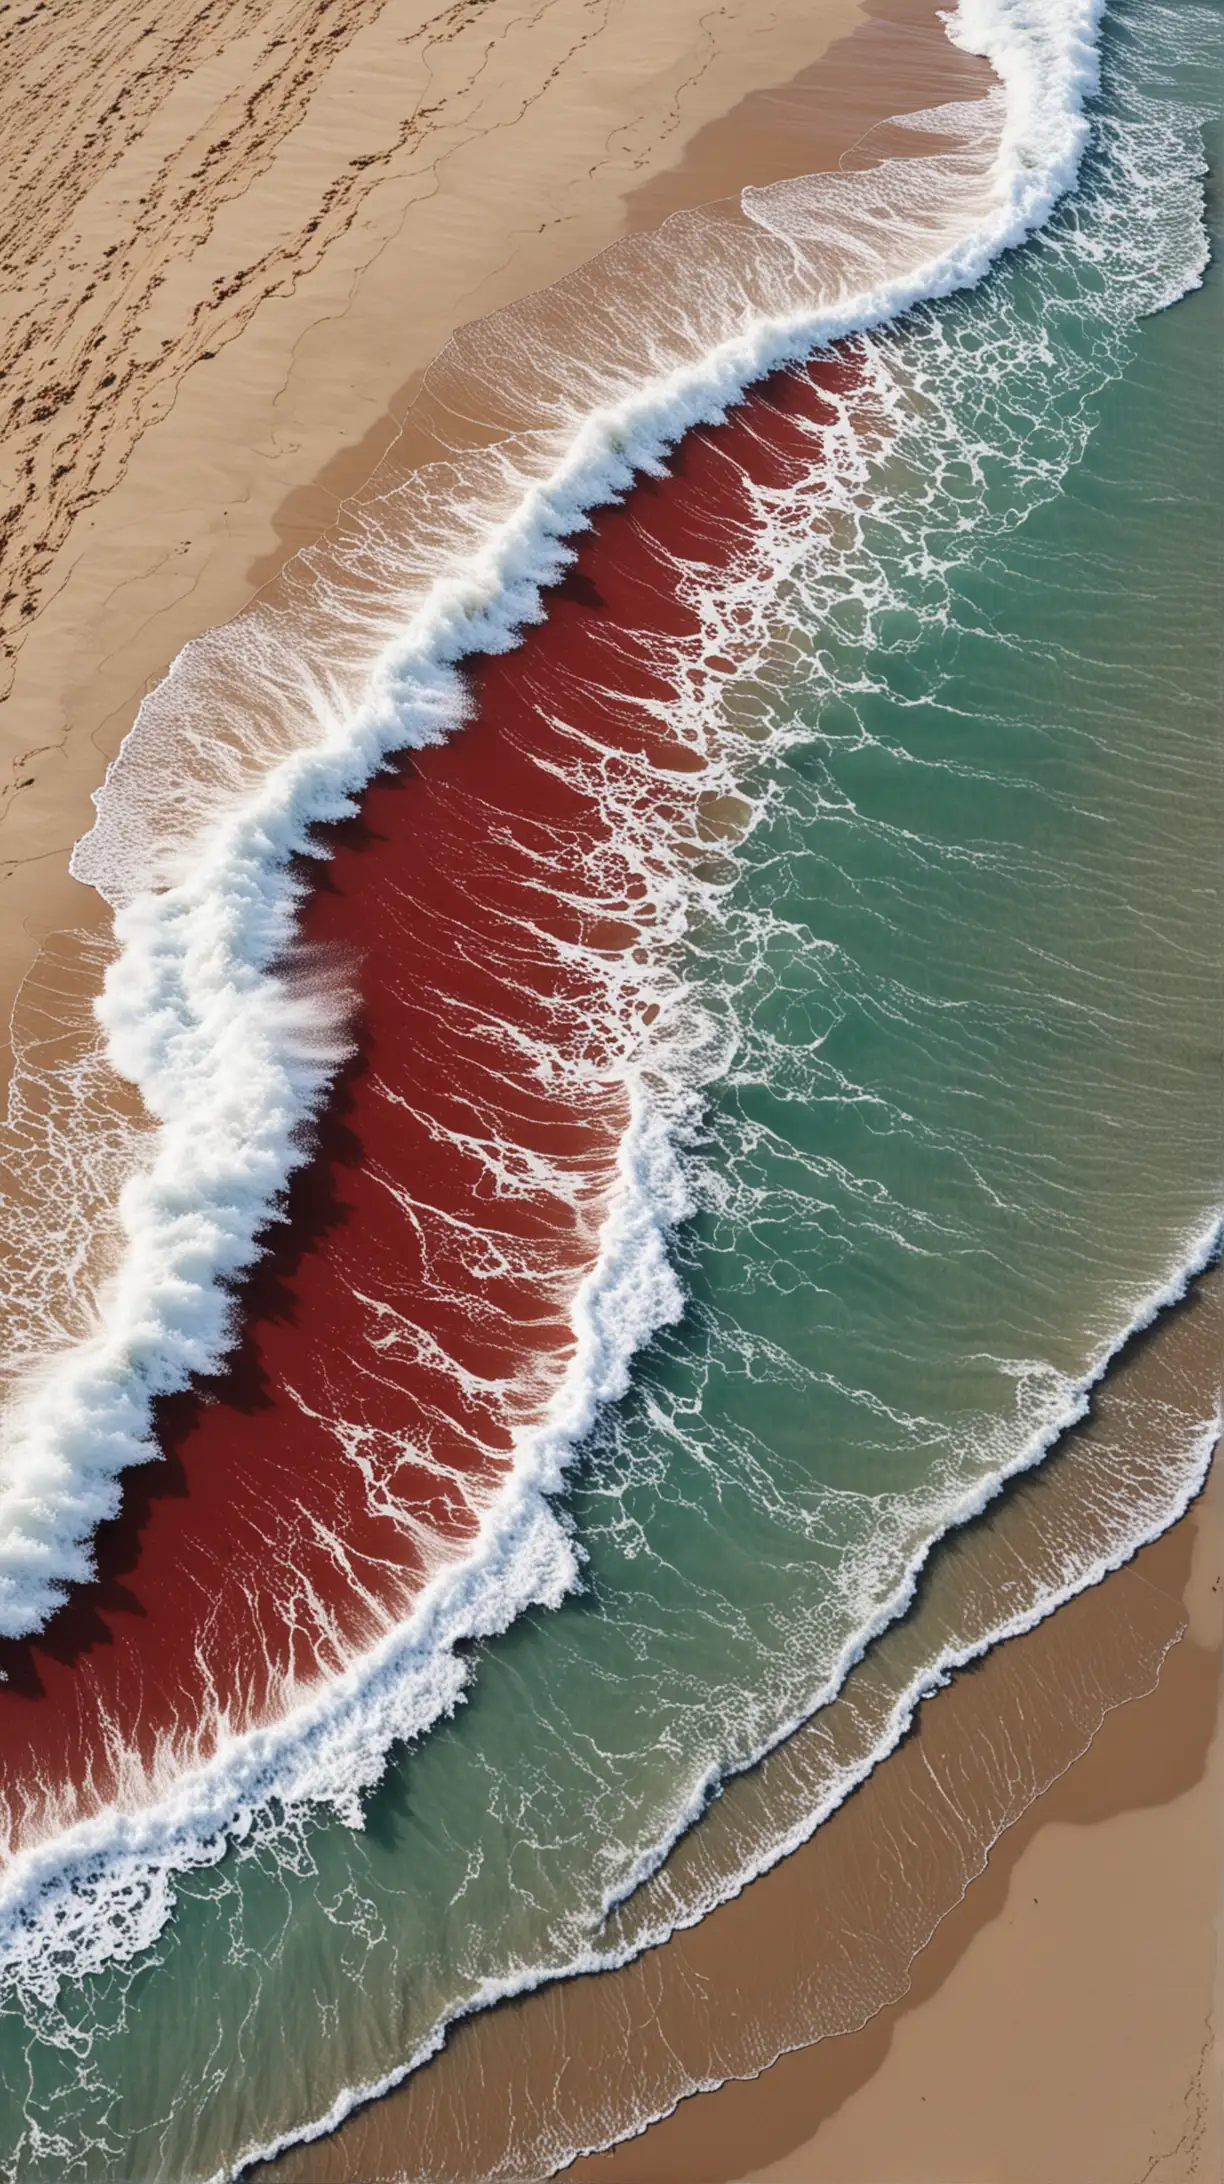 Tropical Wave Approaching Beach with Dramatic Red Tones